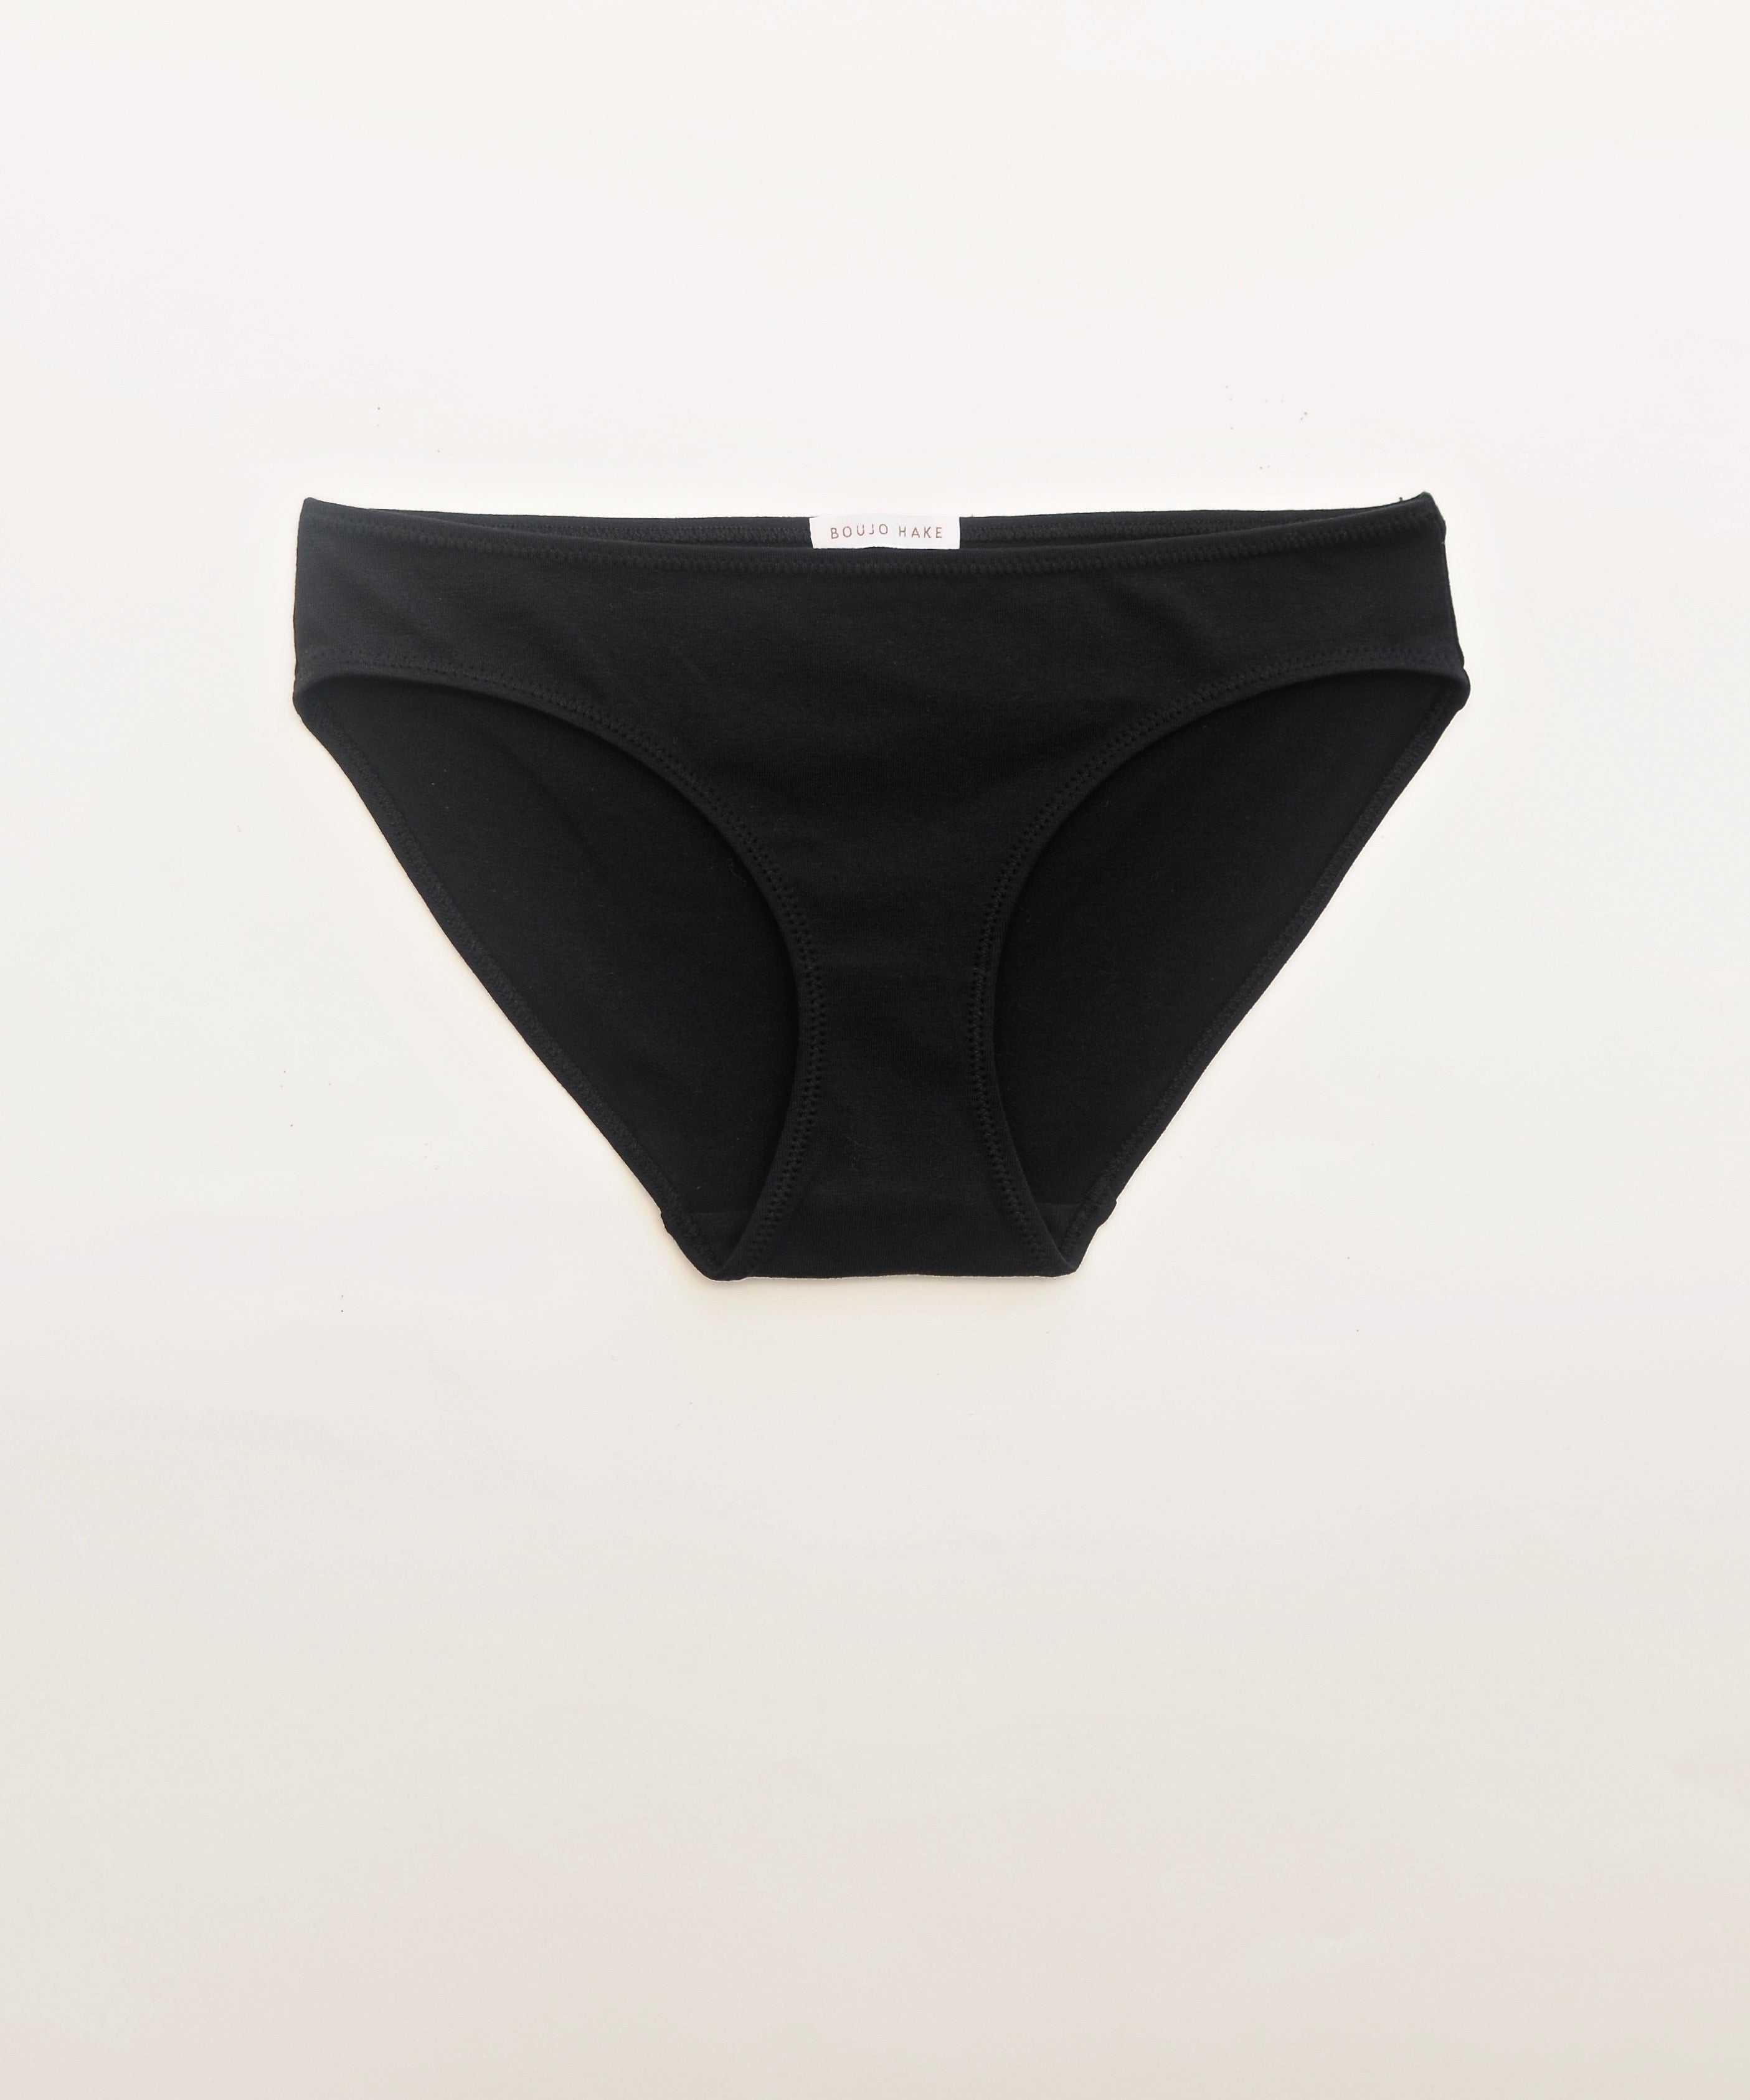 boujo-hake-simple-briefs-black-organic-cotton-GOTScertified-made-in-the-uk-sustainable